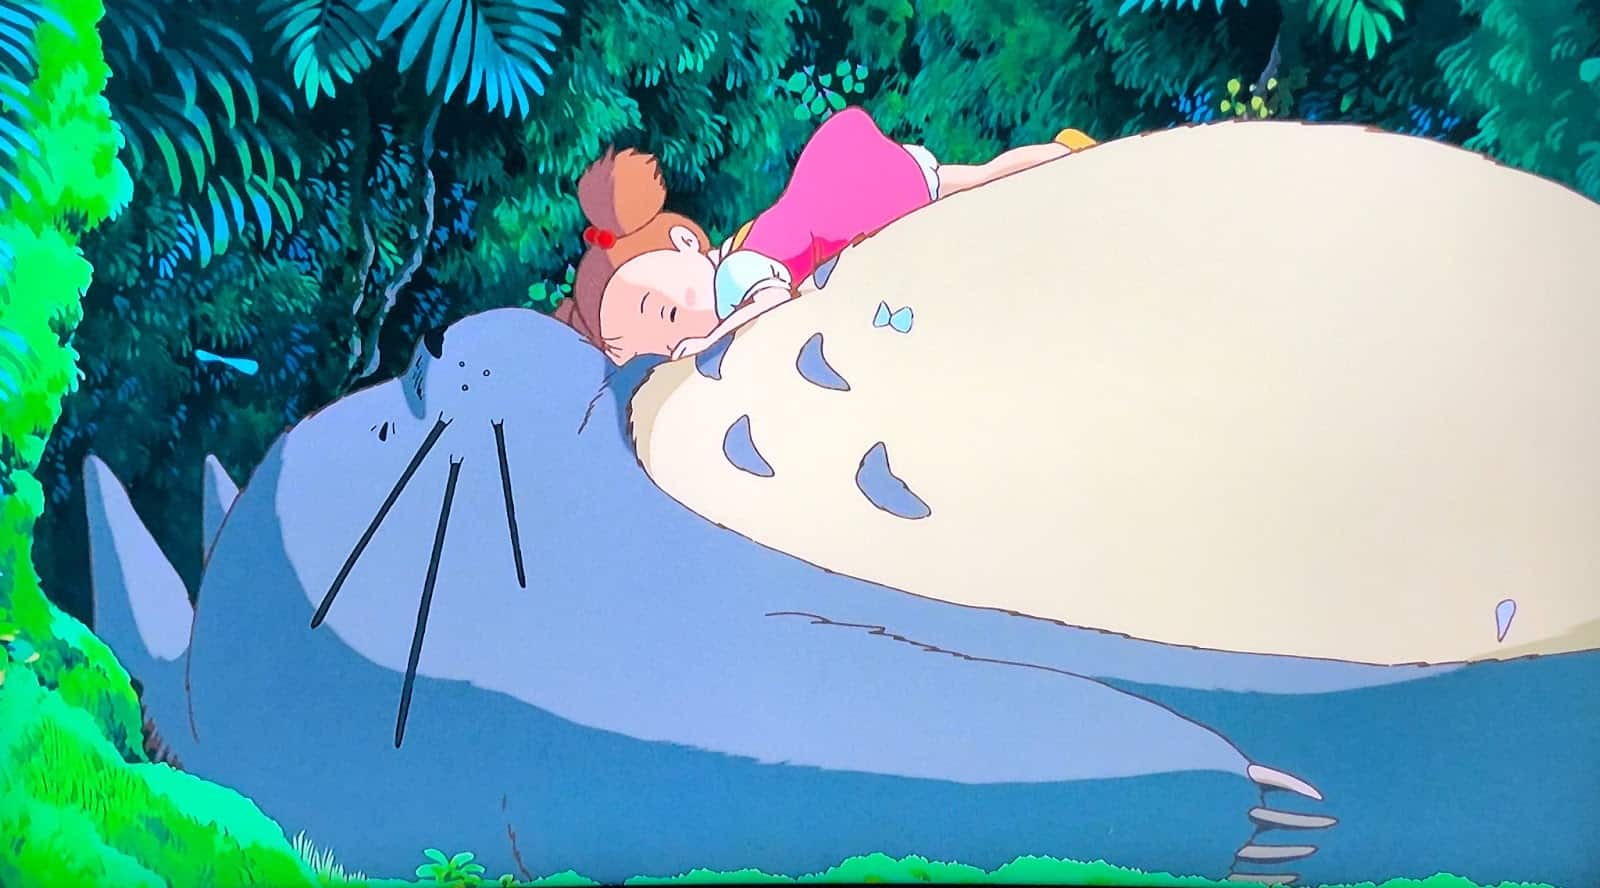 Mei sleeping face down on top of Totoro's chest in the middle of a forest